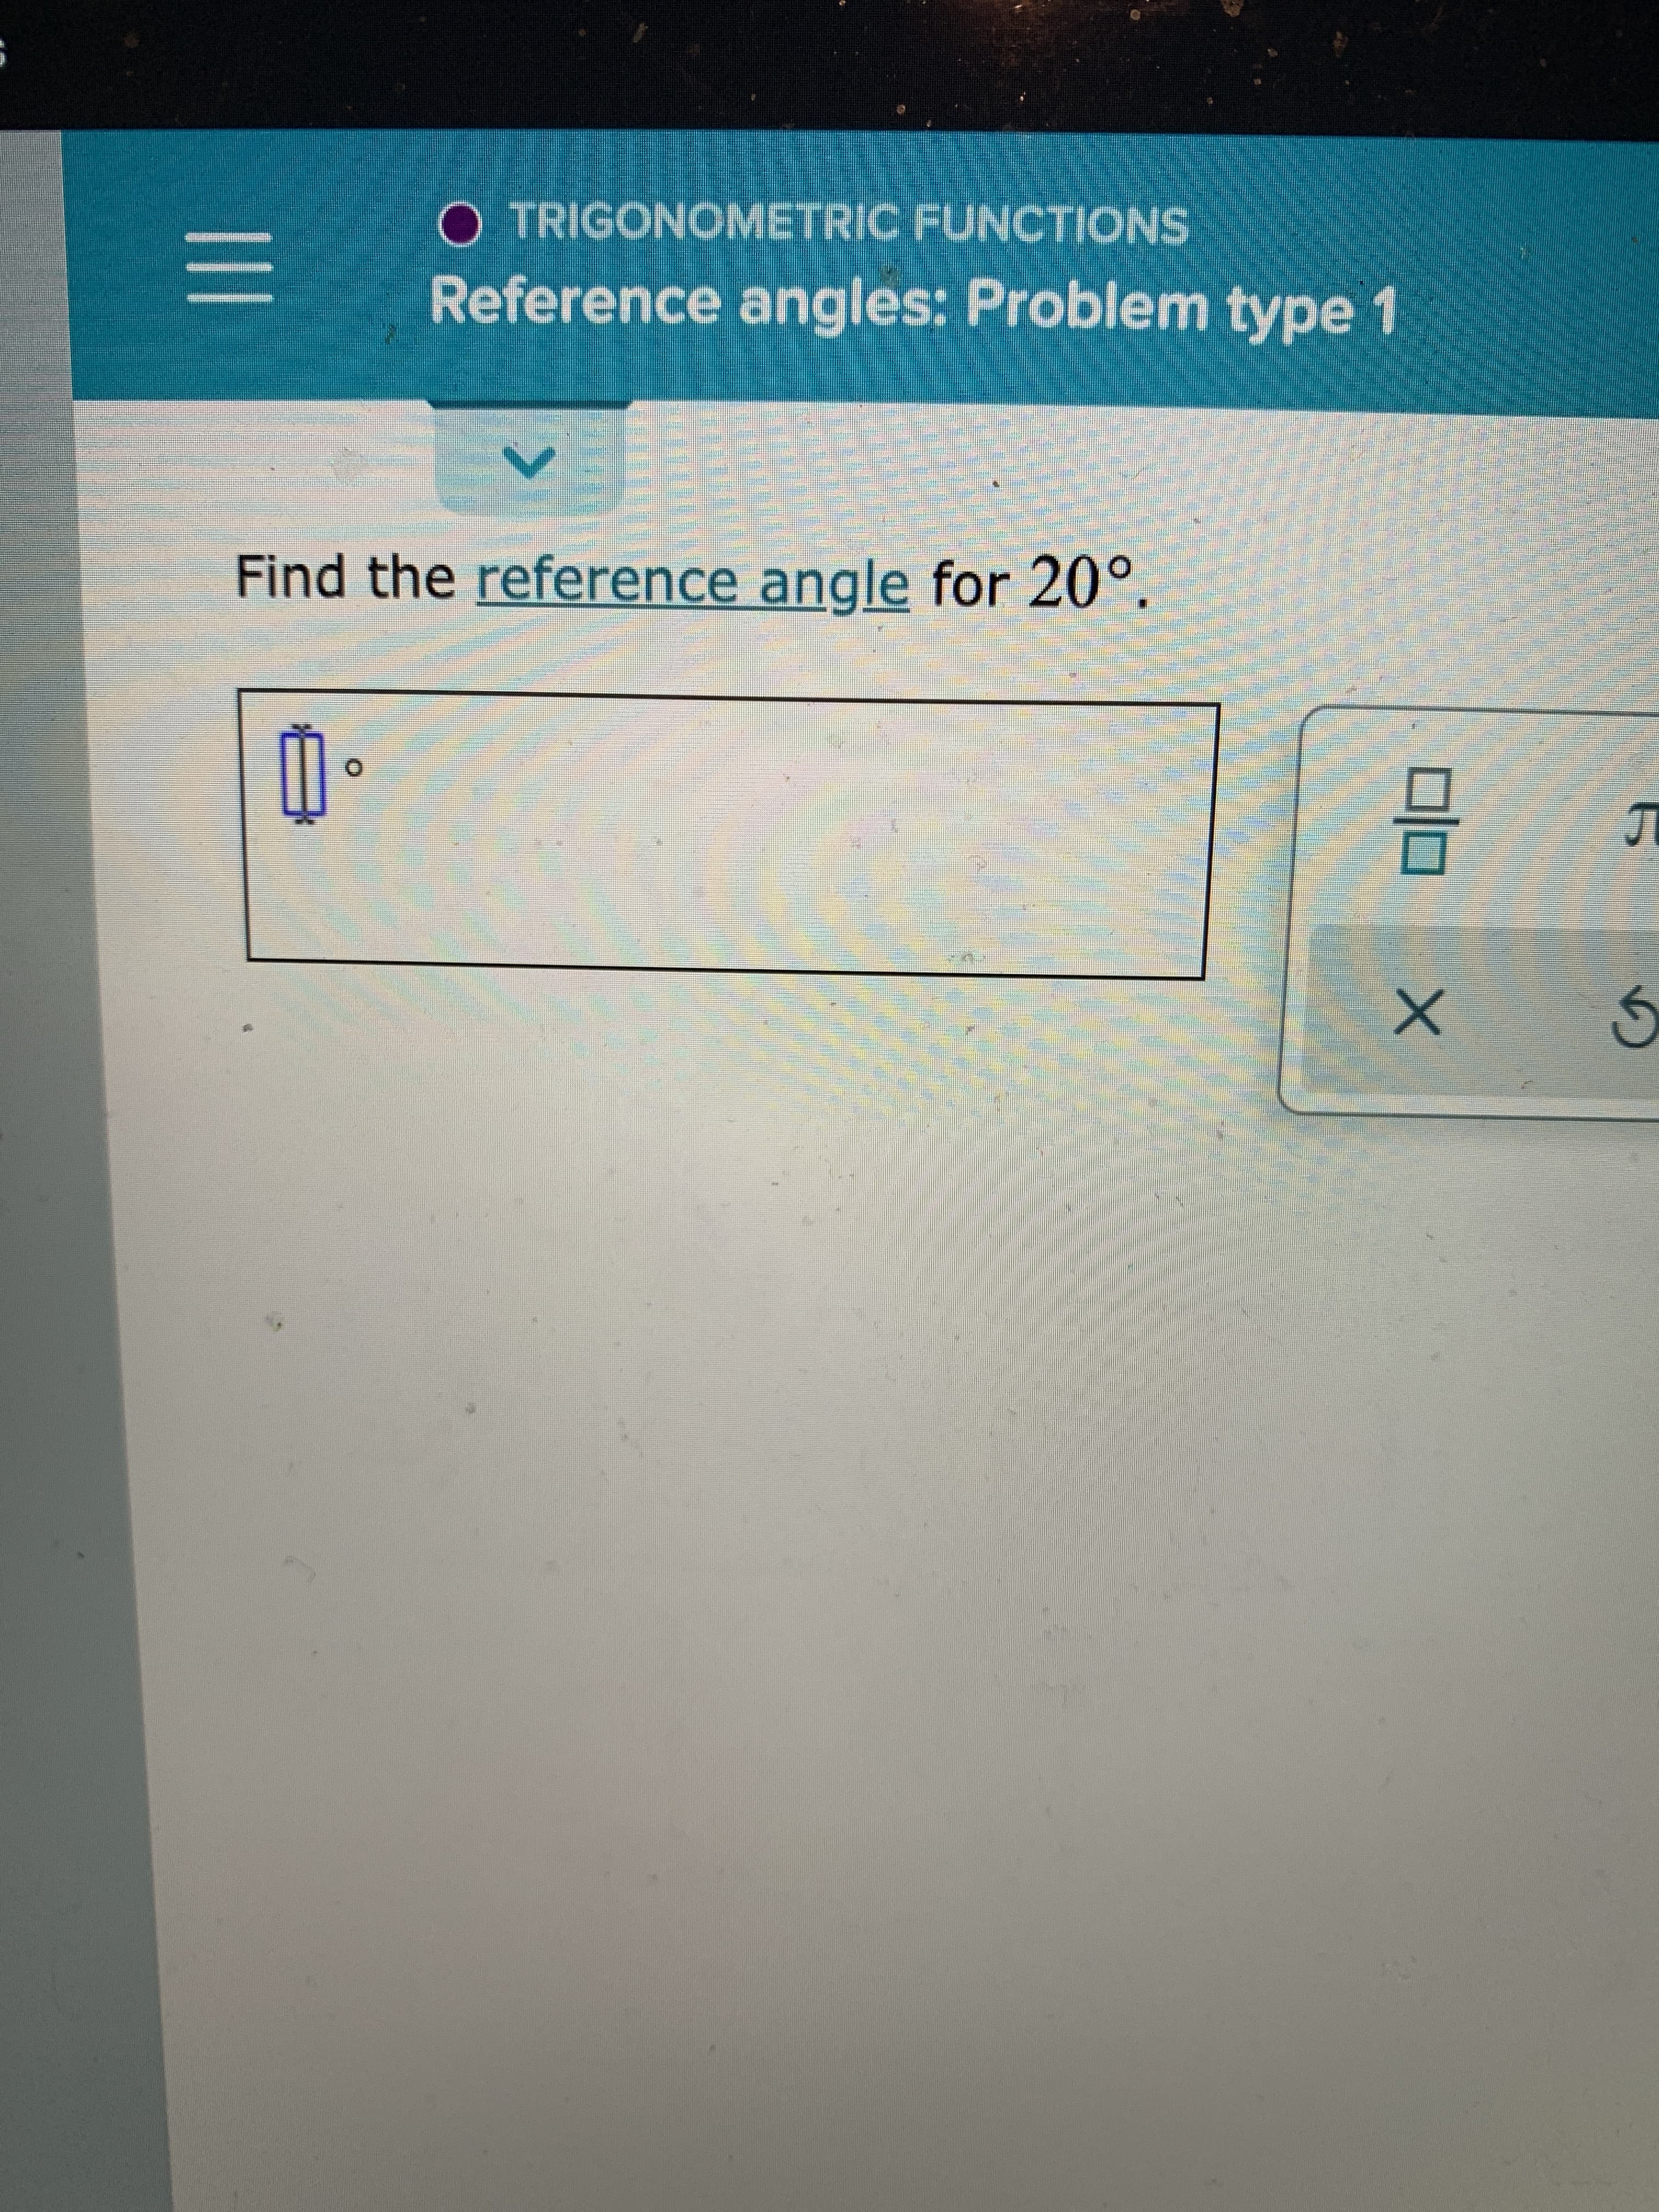 O TRIGONOMETRIC FUNCTIONS
Reference angles: Problem type 1
Find the reference angle for 20°.
O.
II
